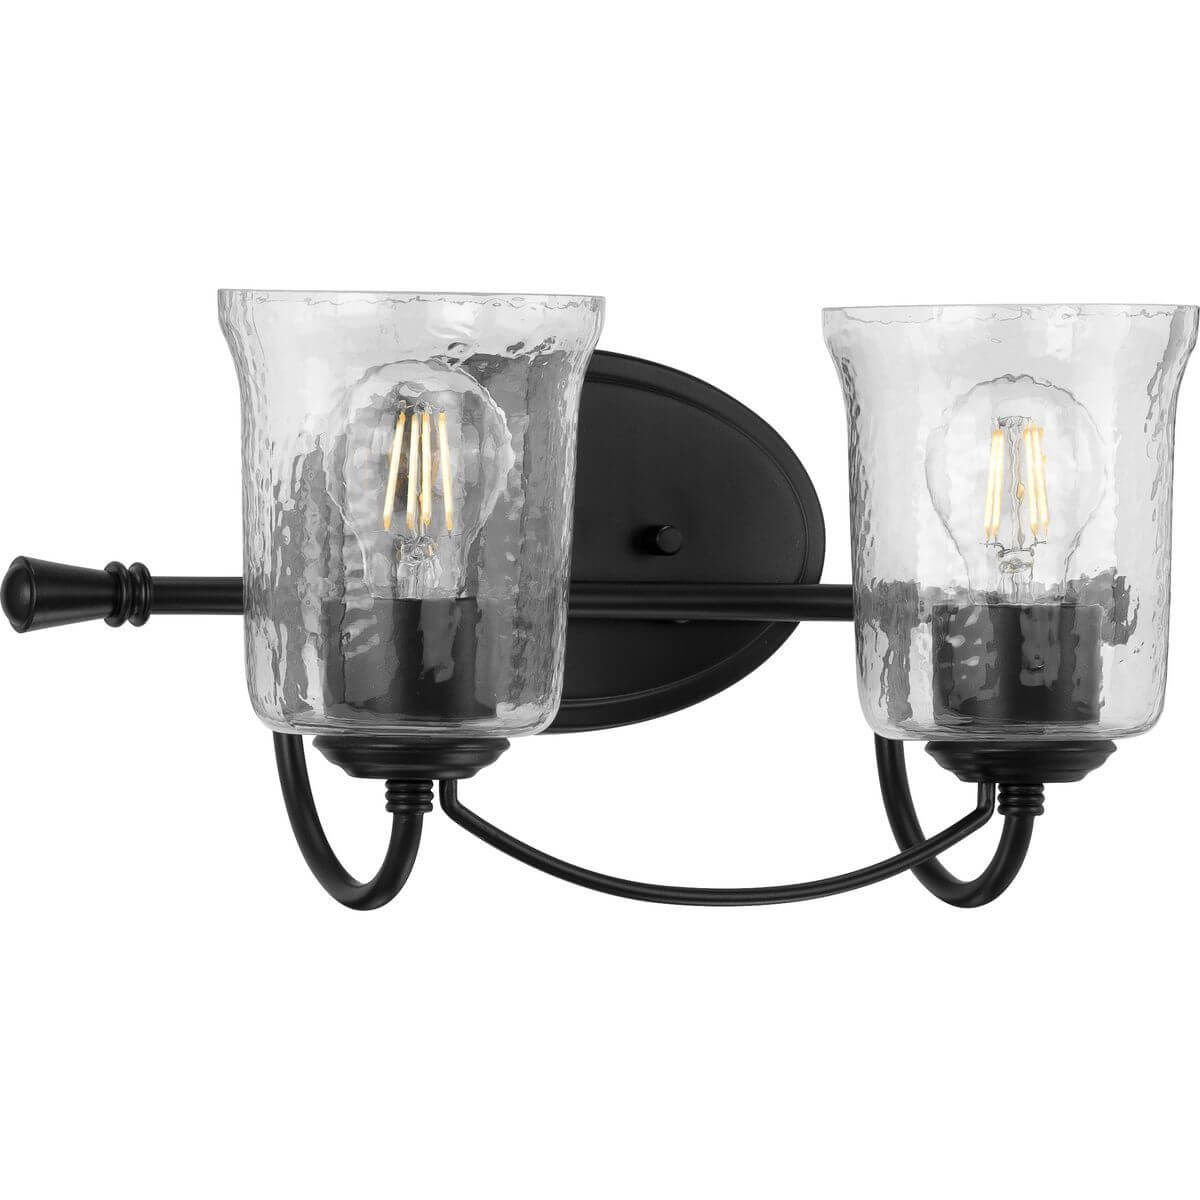 Progress Lighting Bowman 2 Light 16 inch Bath Vanity Light in Matte Black with Clear Chiseled Glass Shade P300254-031